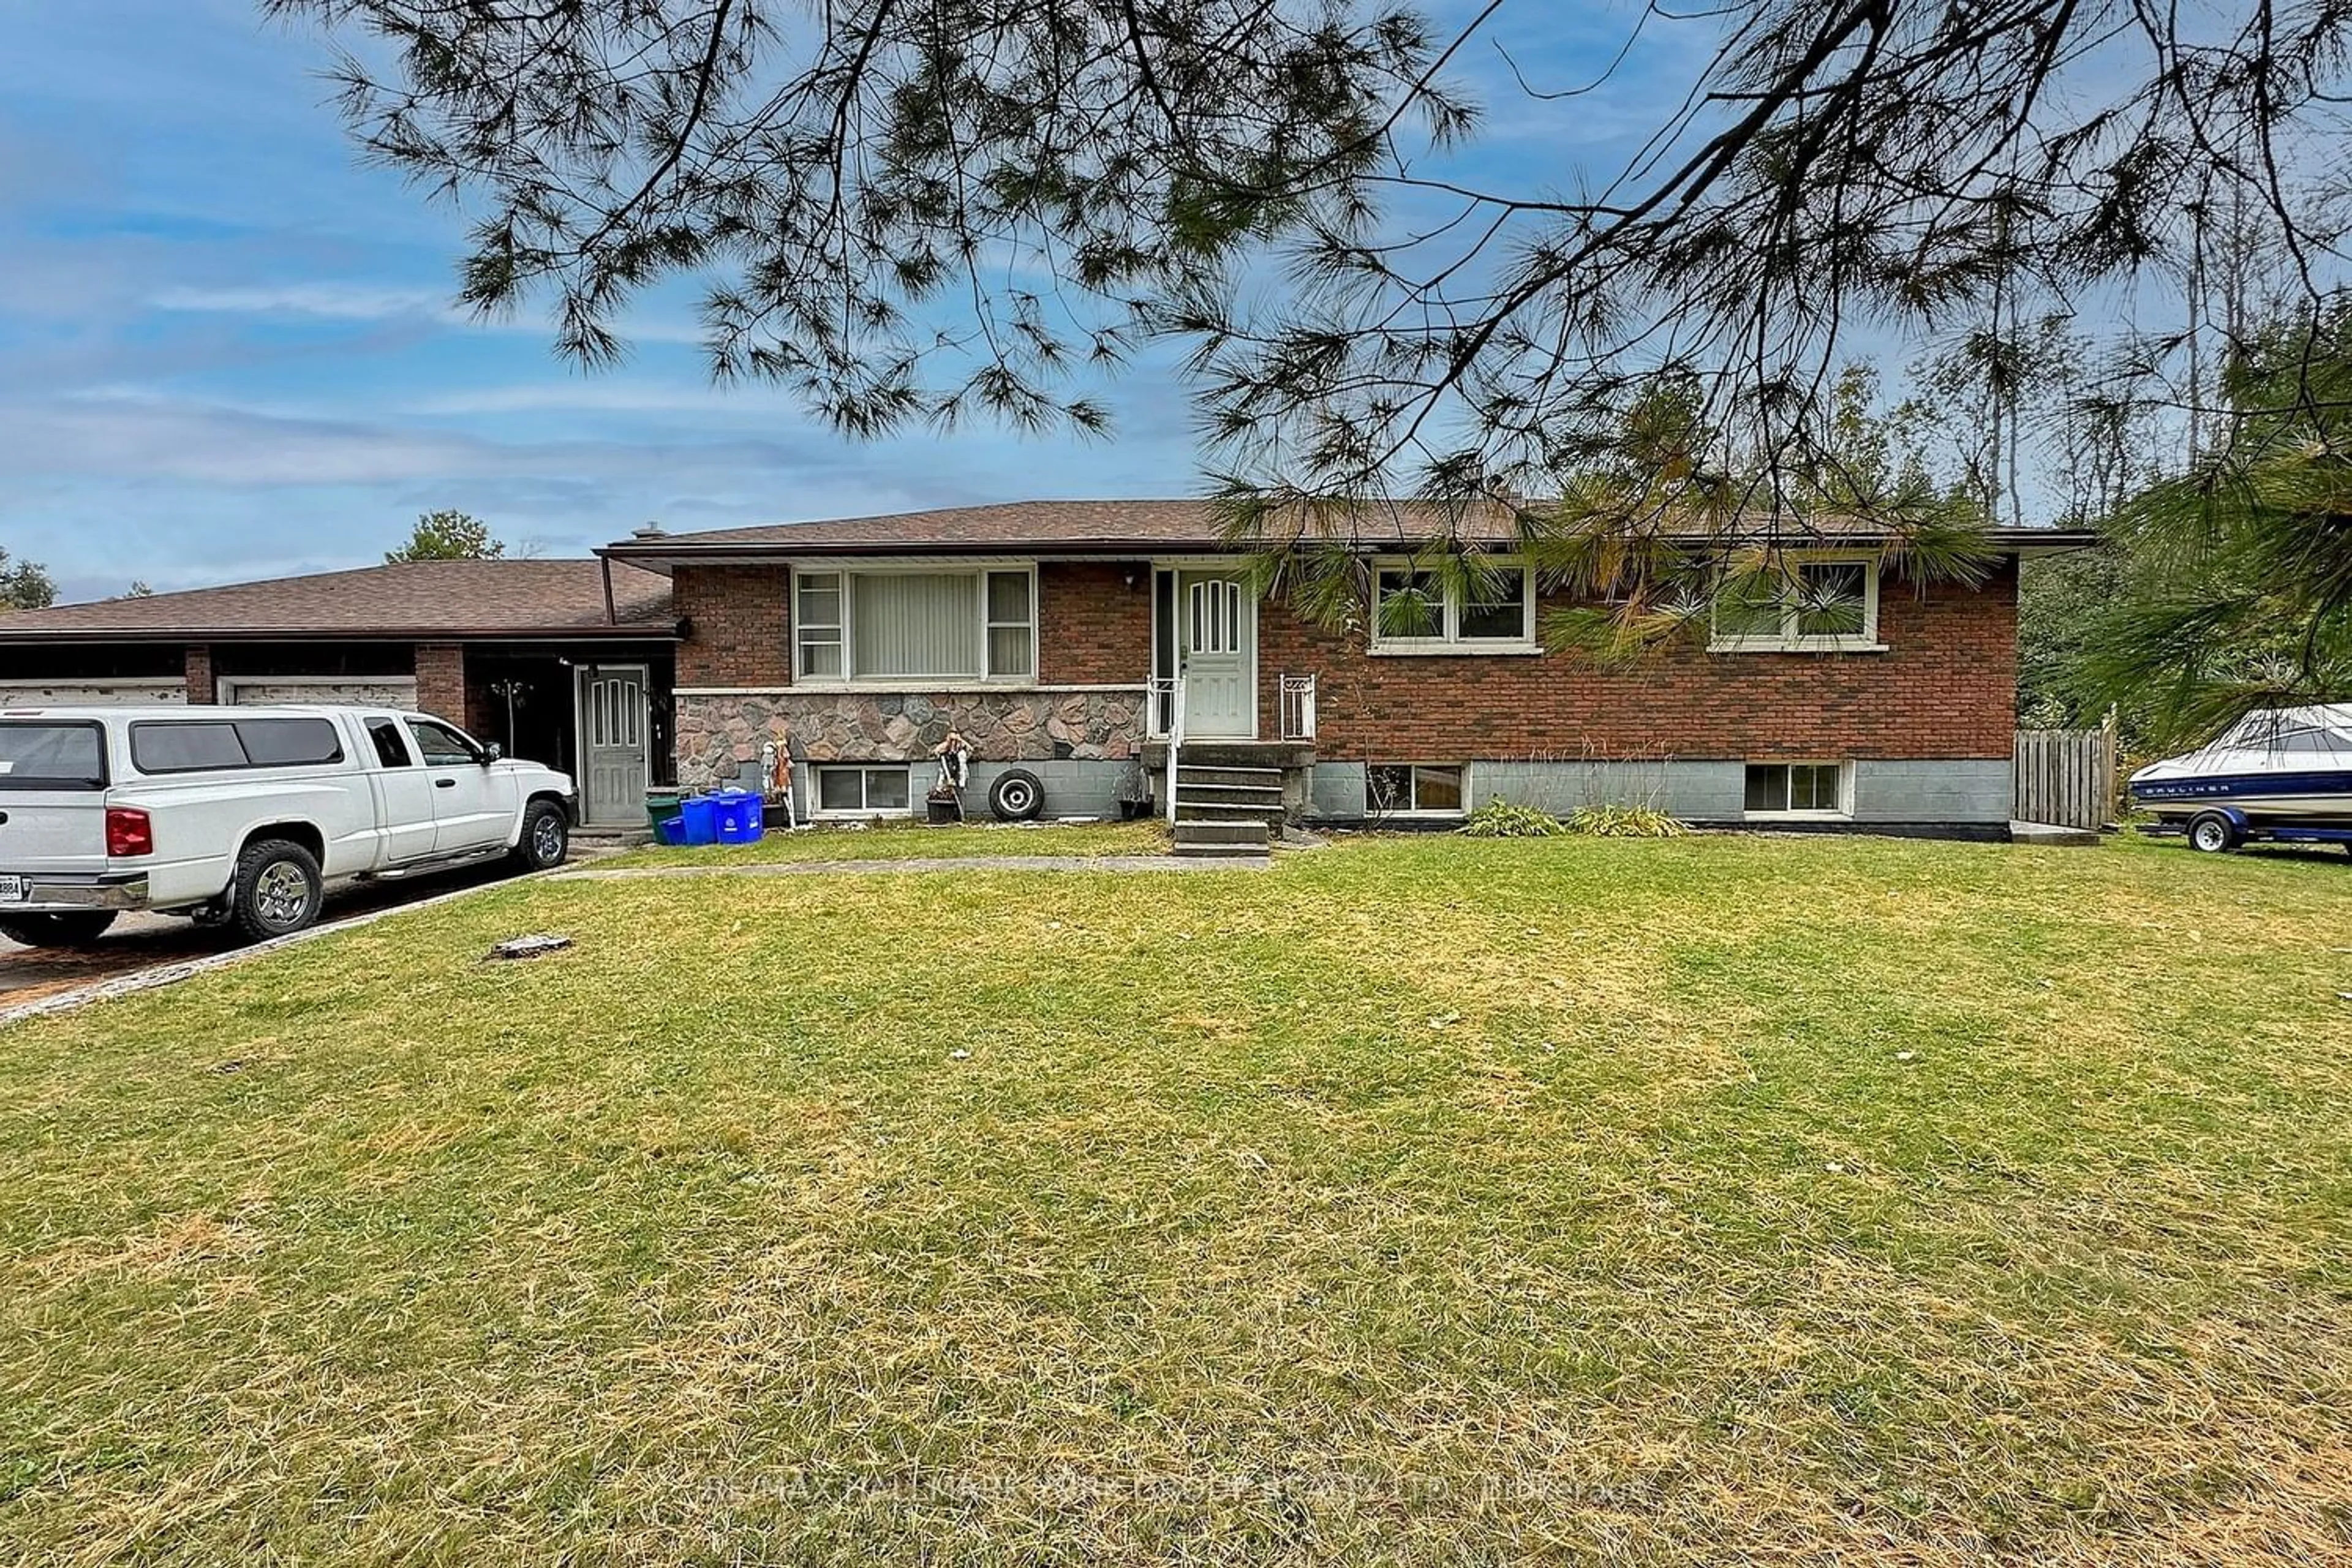 Home with brick exterior material for 20451 Bathurst St, East Gwillimbury Ontario L9N 1N4